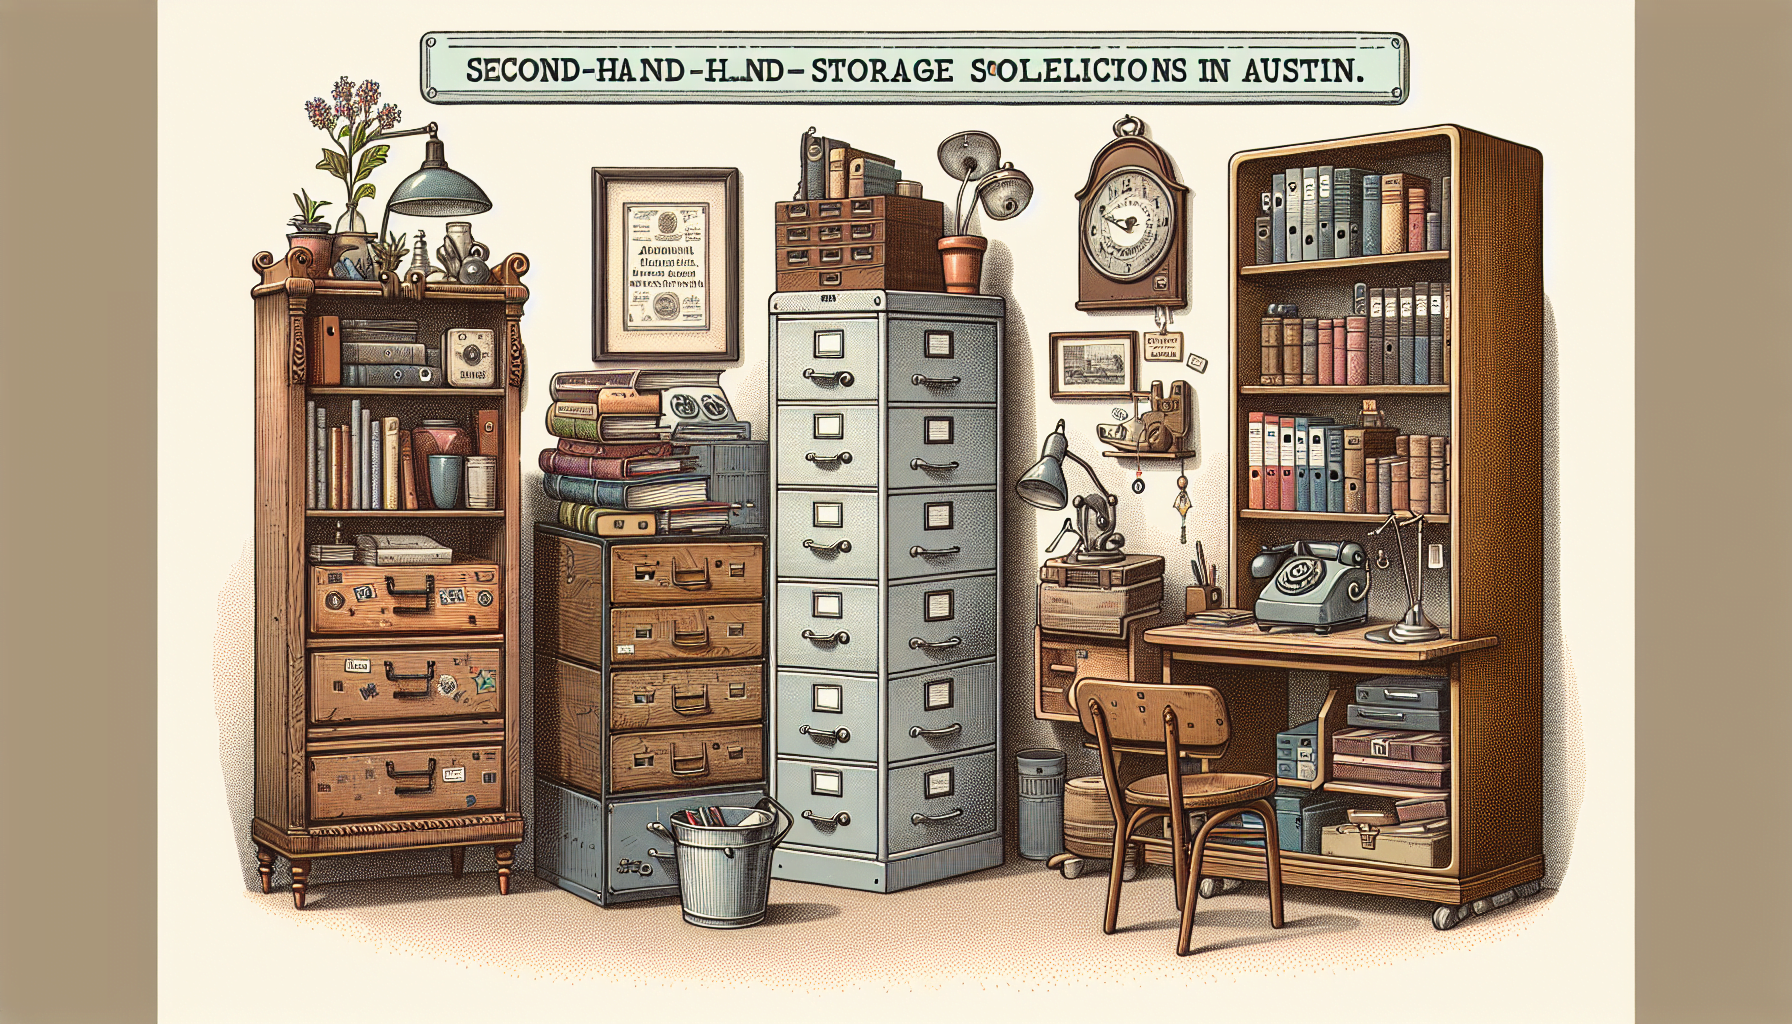 Illustration of second-hand storage solutions for organizing the office